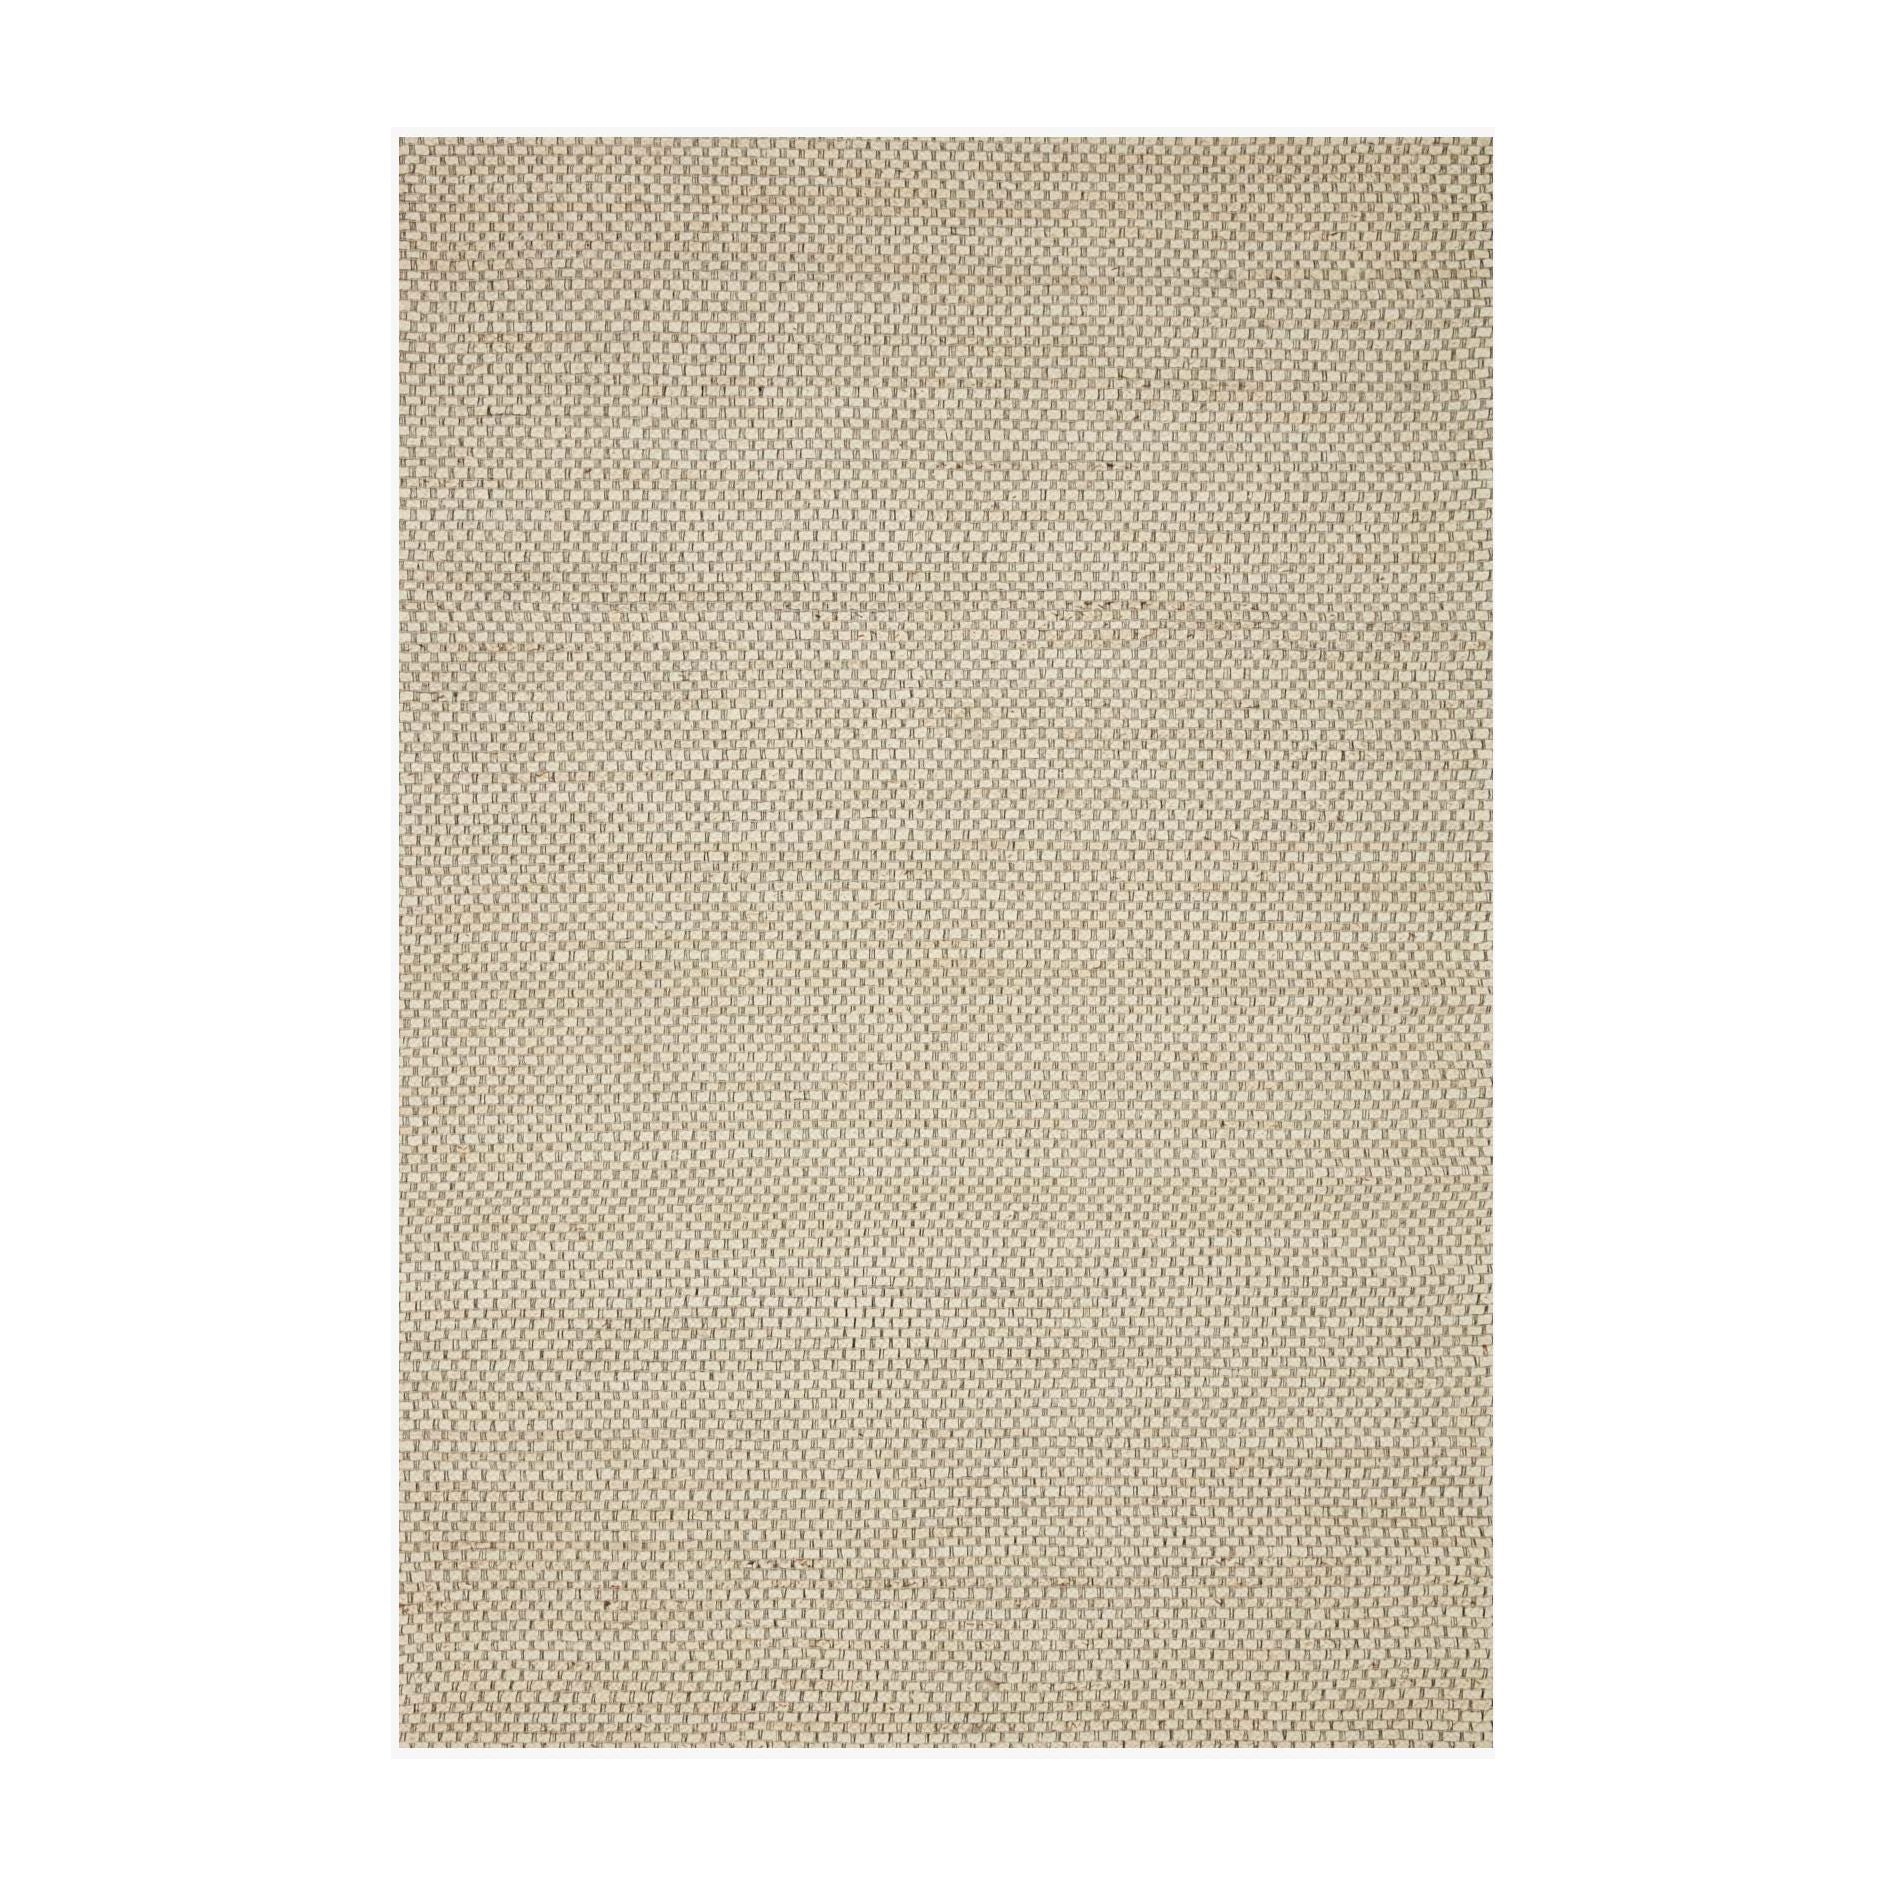 The Lily Ivory Area Rug is an earthy base that isn't your average jute area rug. The hand-woven collection has an intricate yet subtle textural look that adds an elevated layer to any style. This area rug would be great for living rooms, dining rooms, or other high-traffic areas.   Hand Woven 97% Jute | 3% Other Fiber LIL-01 Ivory